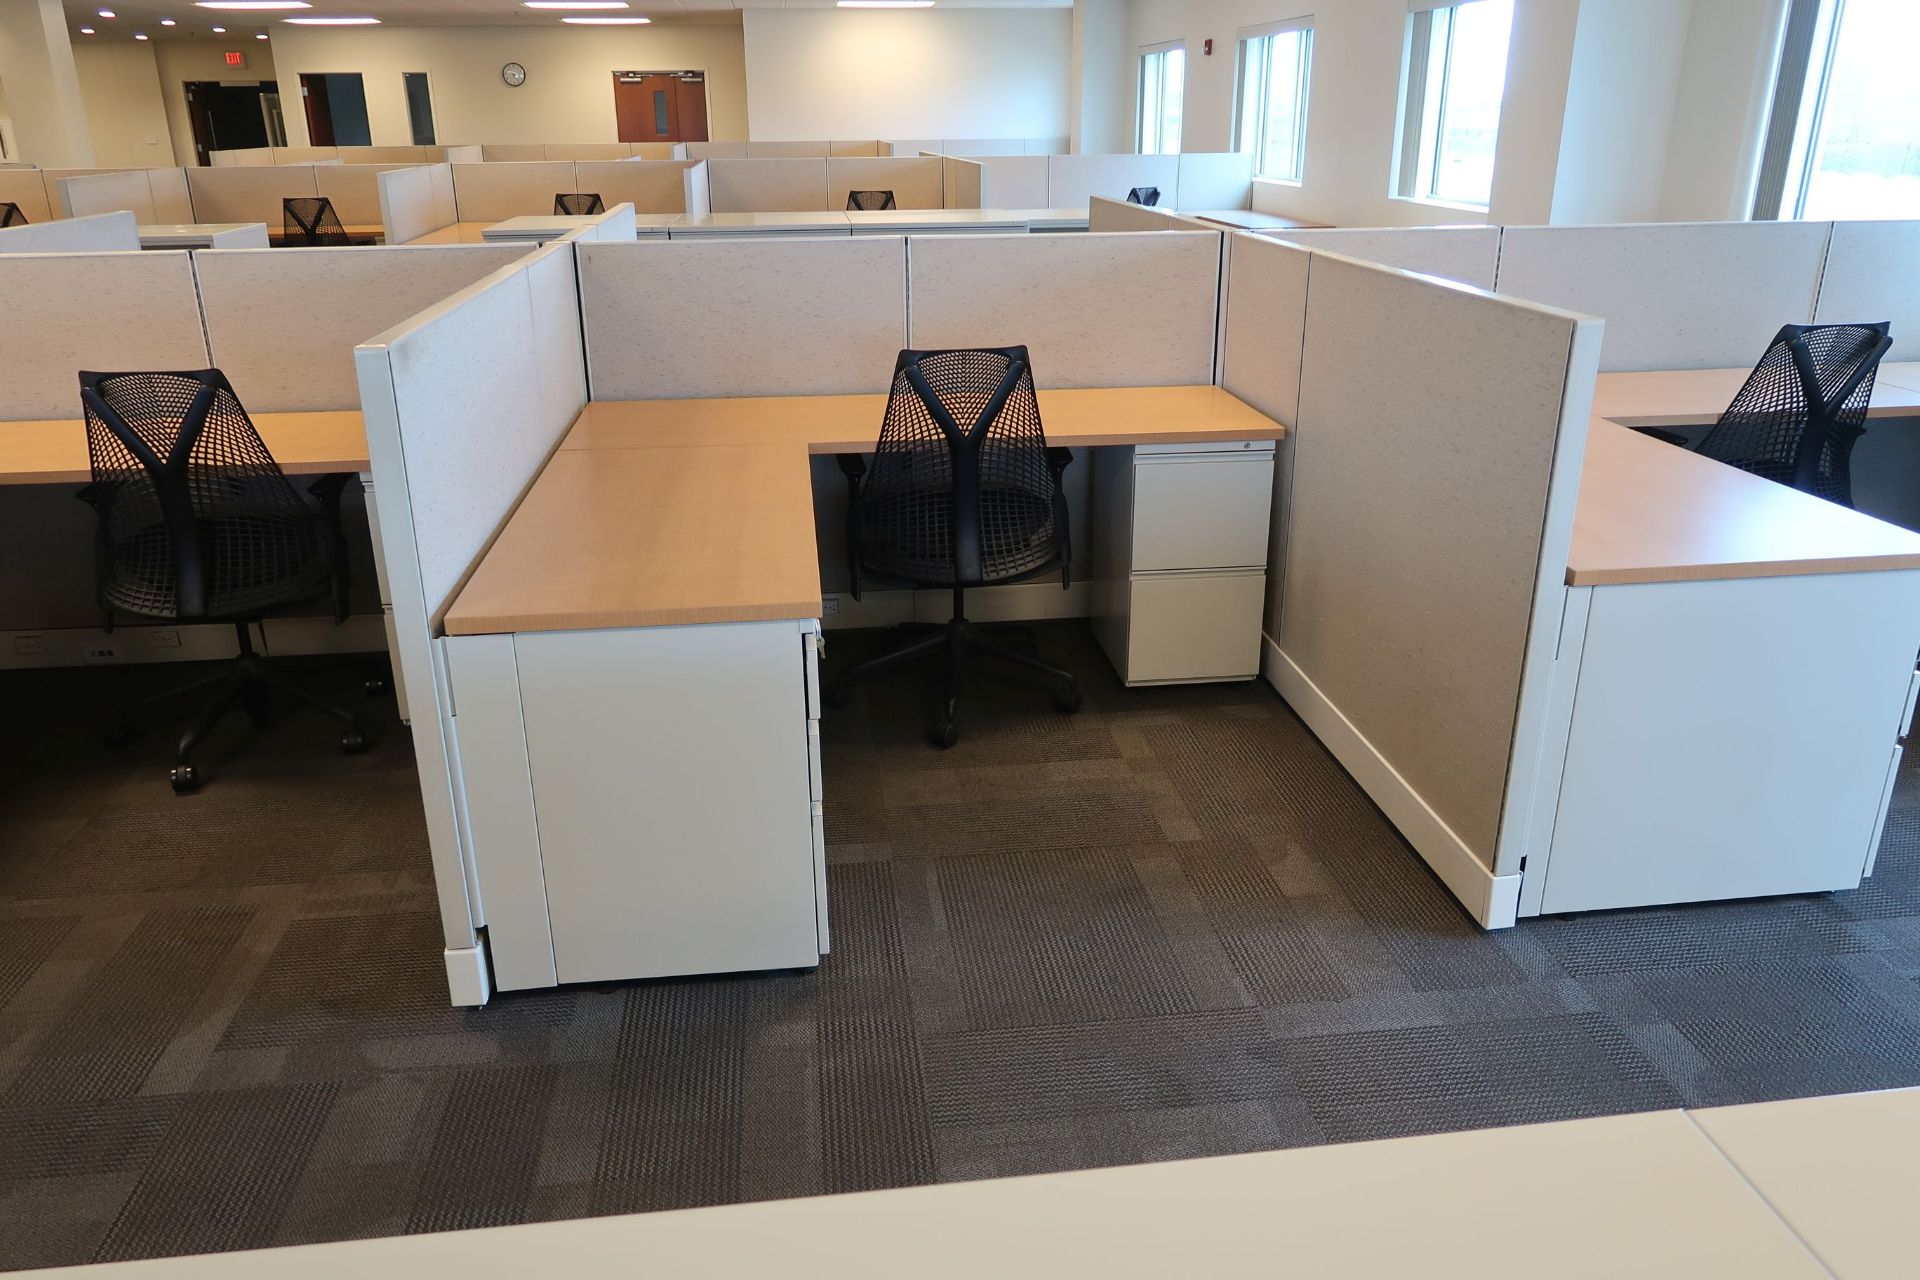 (LOT) 10-PERSON HERMAN MILLER CUBICLE SET 47" HIGH WALLS WITH CHAIRS - Image 10 of 11